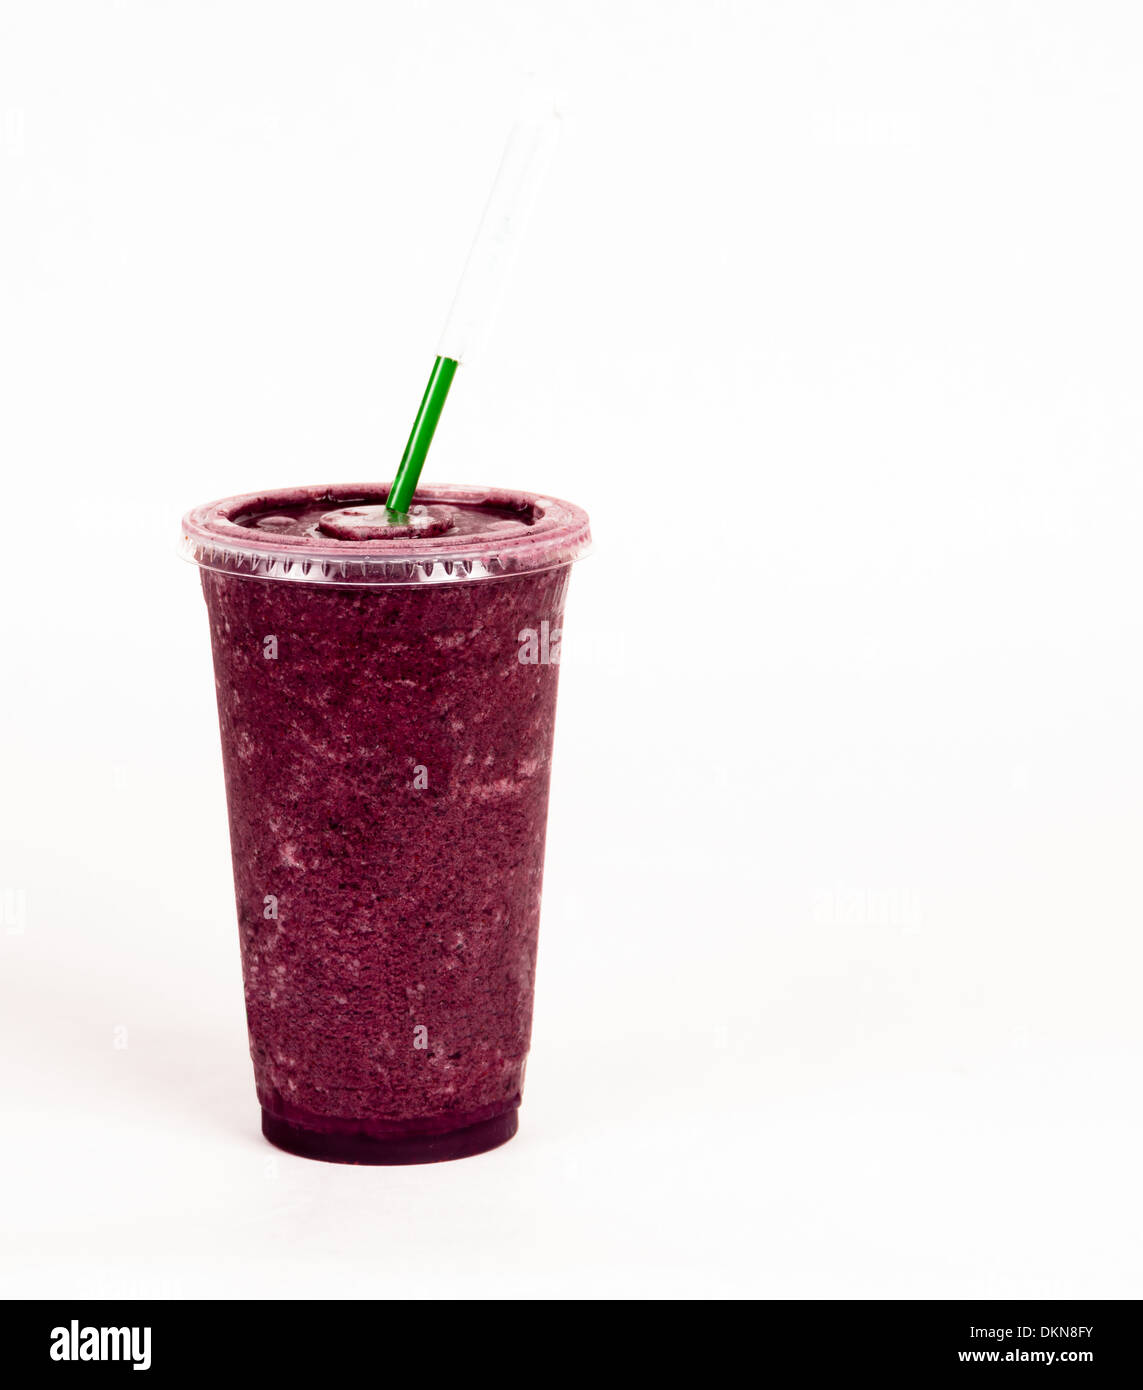 https://c8.alamy.com/comp/DKN8FY/pomegranite-smoothie-sitting-on-white-ready-to-drink-in-a-to-go-cup-DKN8FY.jpg